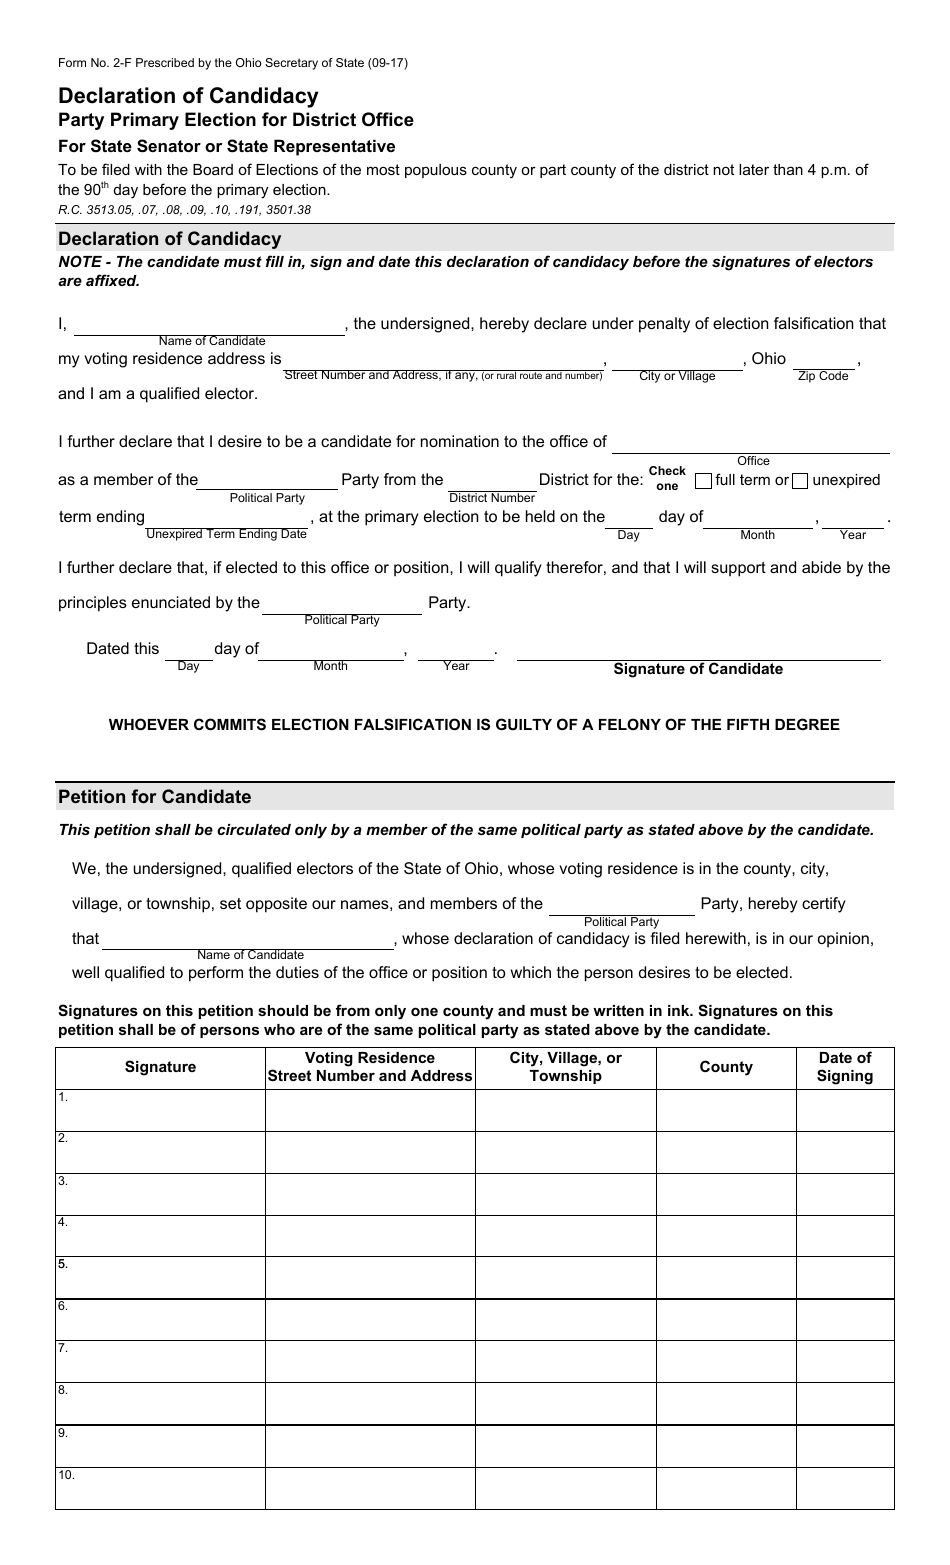 Form 2-F Declaration of Candidacy - Party Primary District Office - State Senator or State Representative - Ohio, Page 1